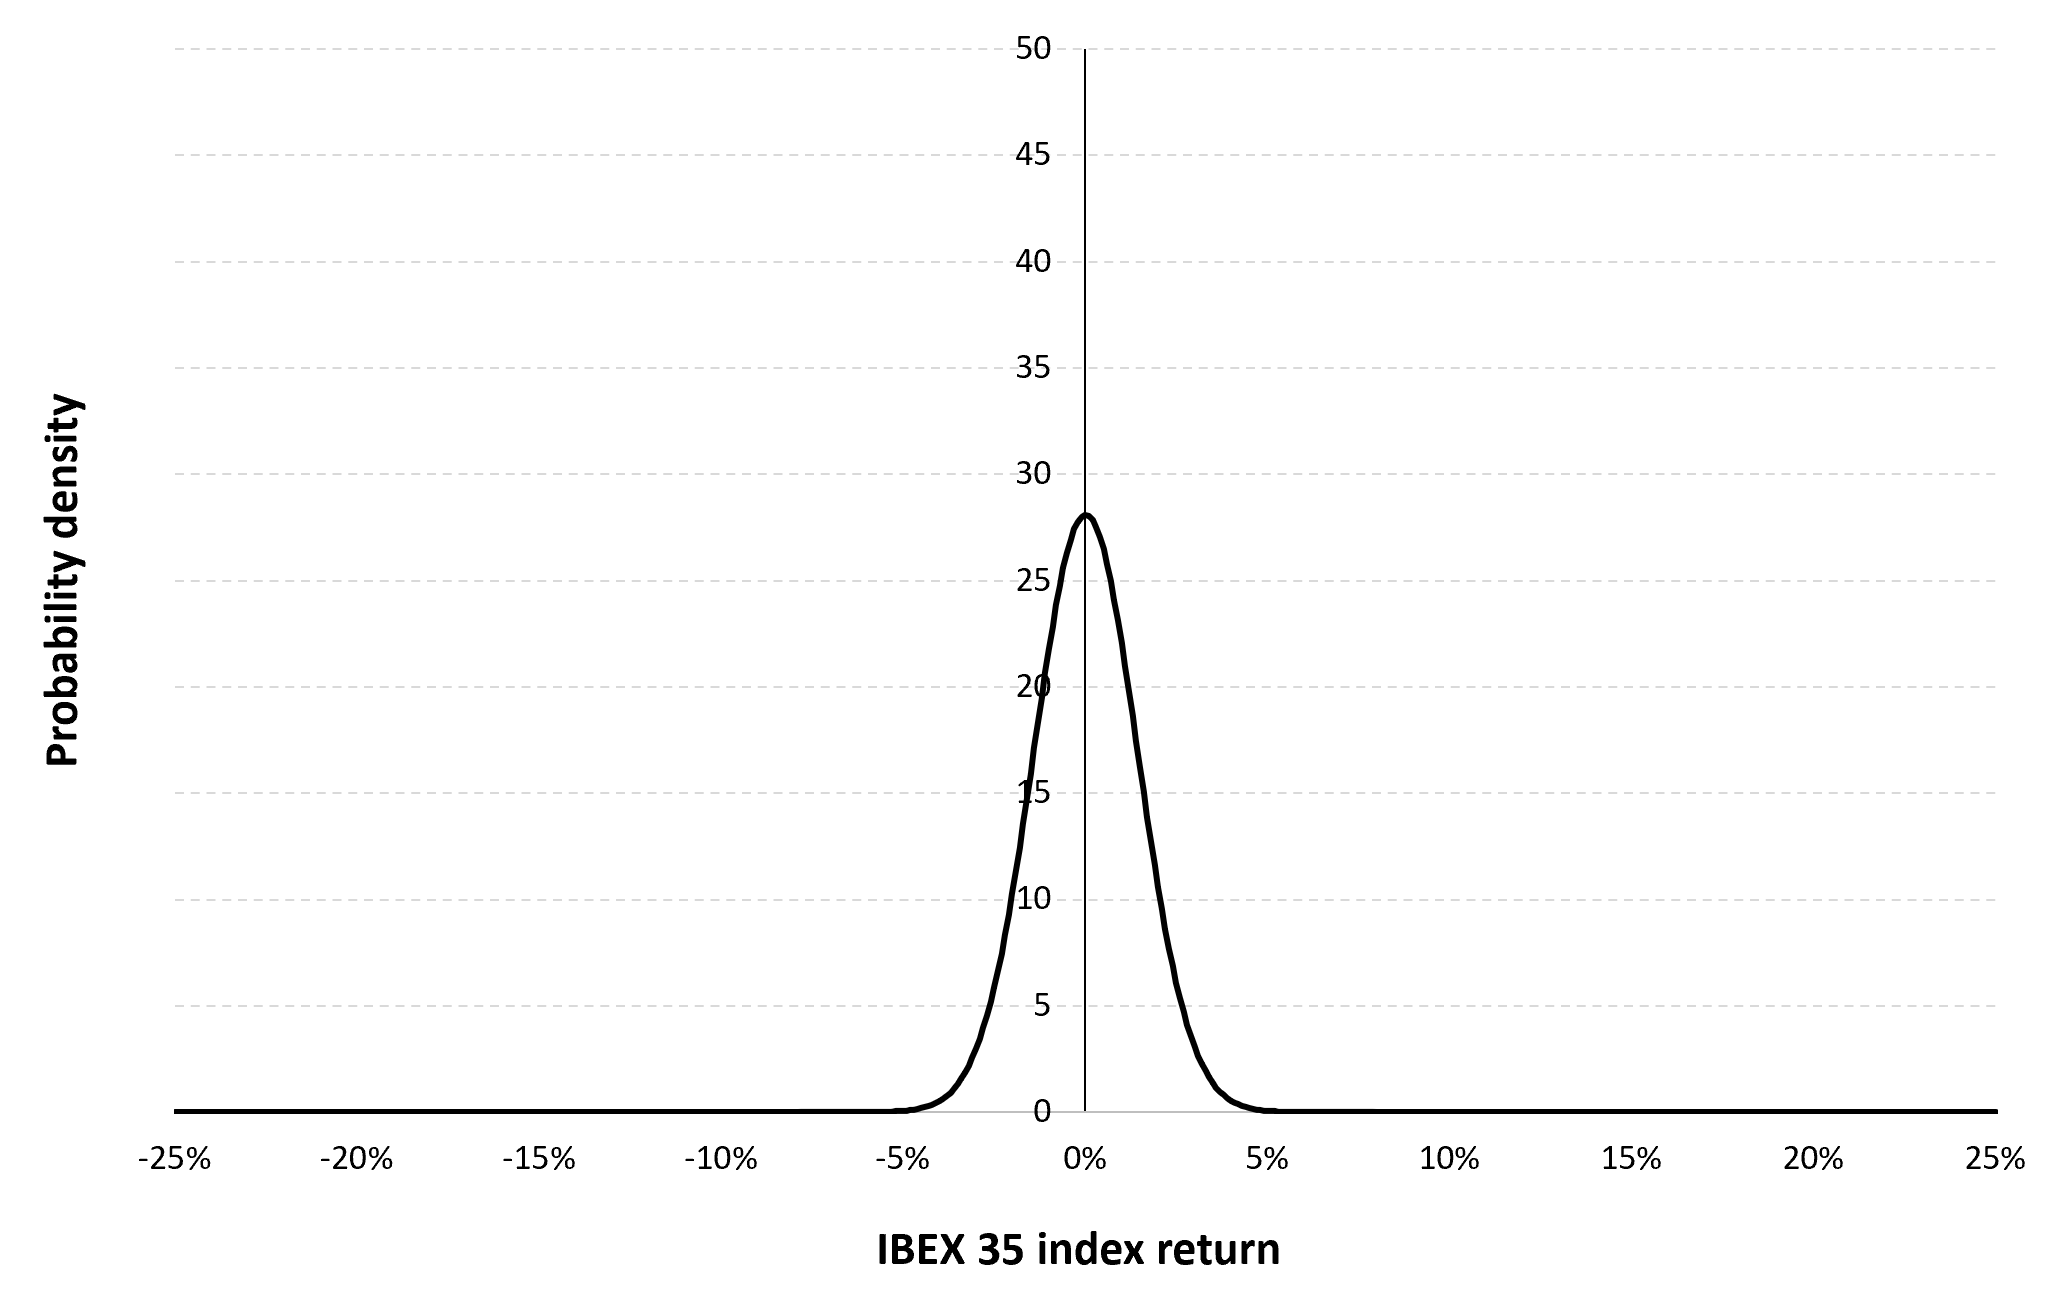 Gaussian distribution of the daily IBEX 35 index returns